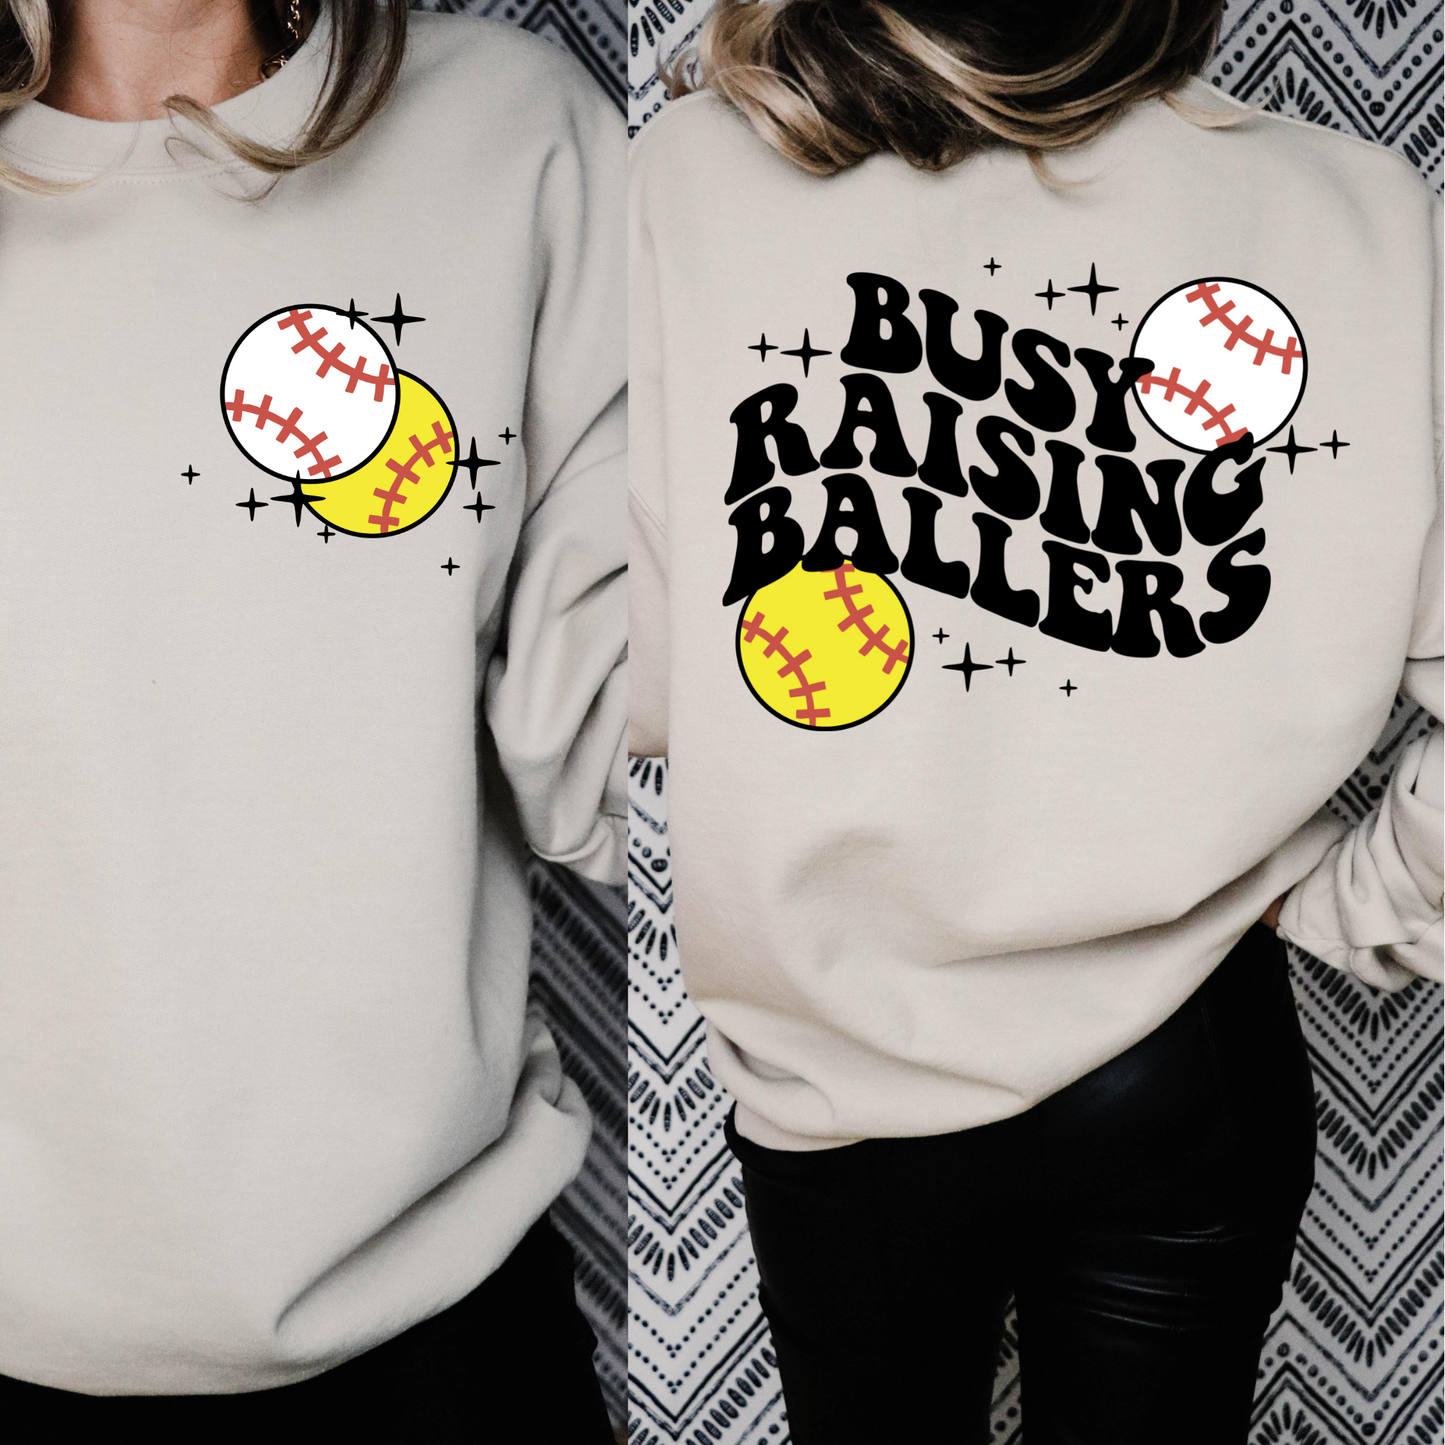 Busy raising ballers both sweater